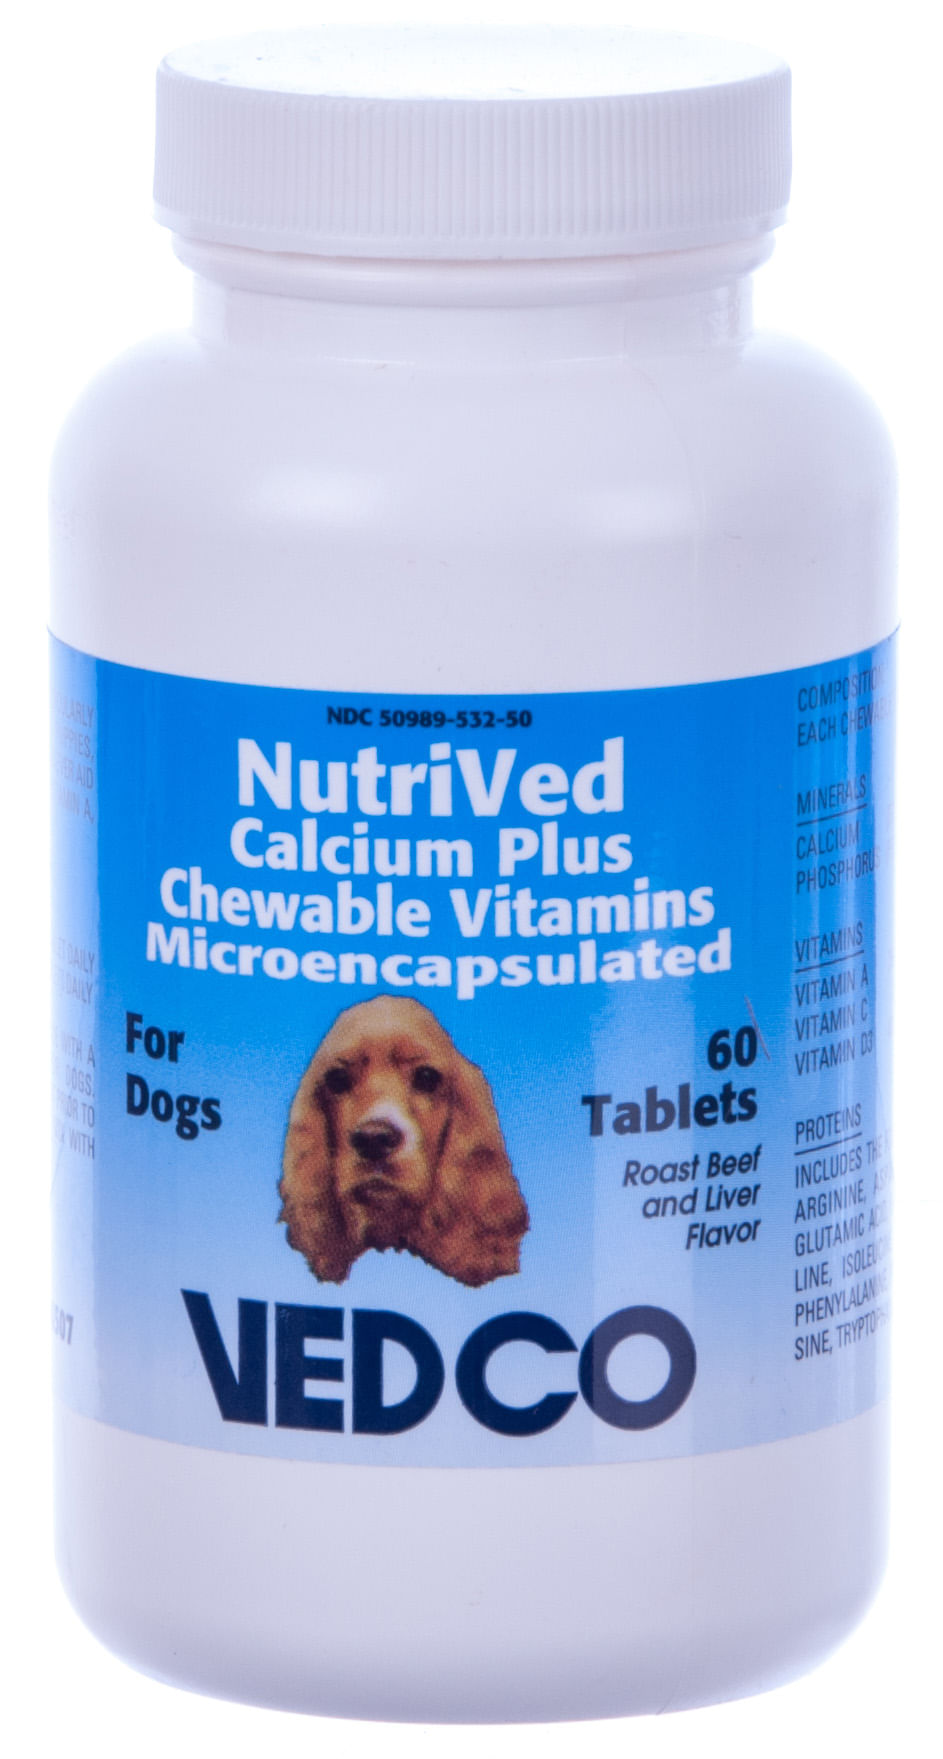 NutriVed Calcium Plus Chewable Vitamins for Dogs, 60 ct - Jeffers